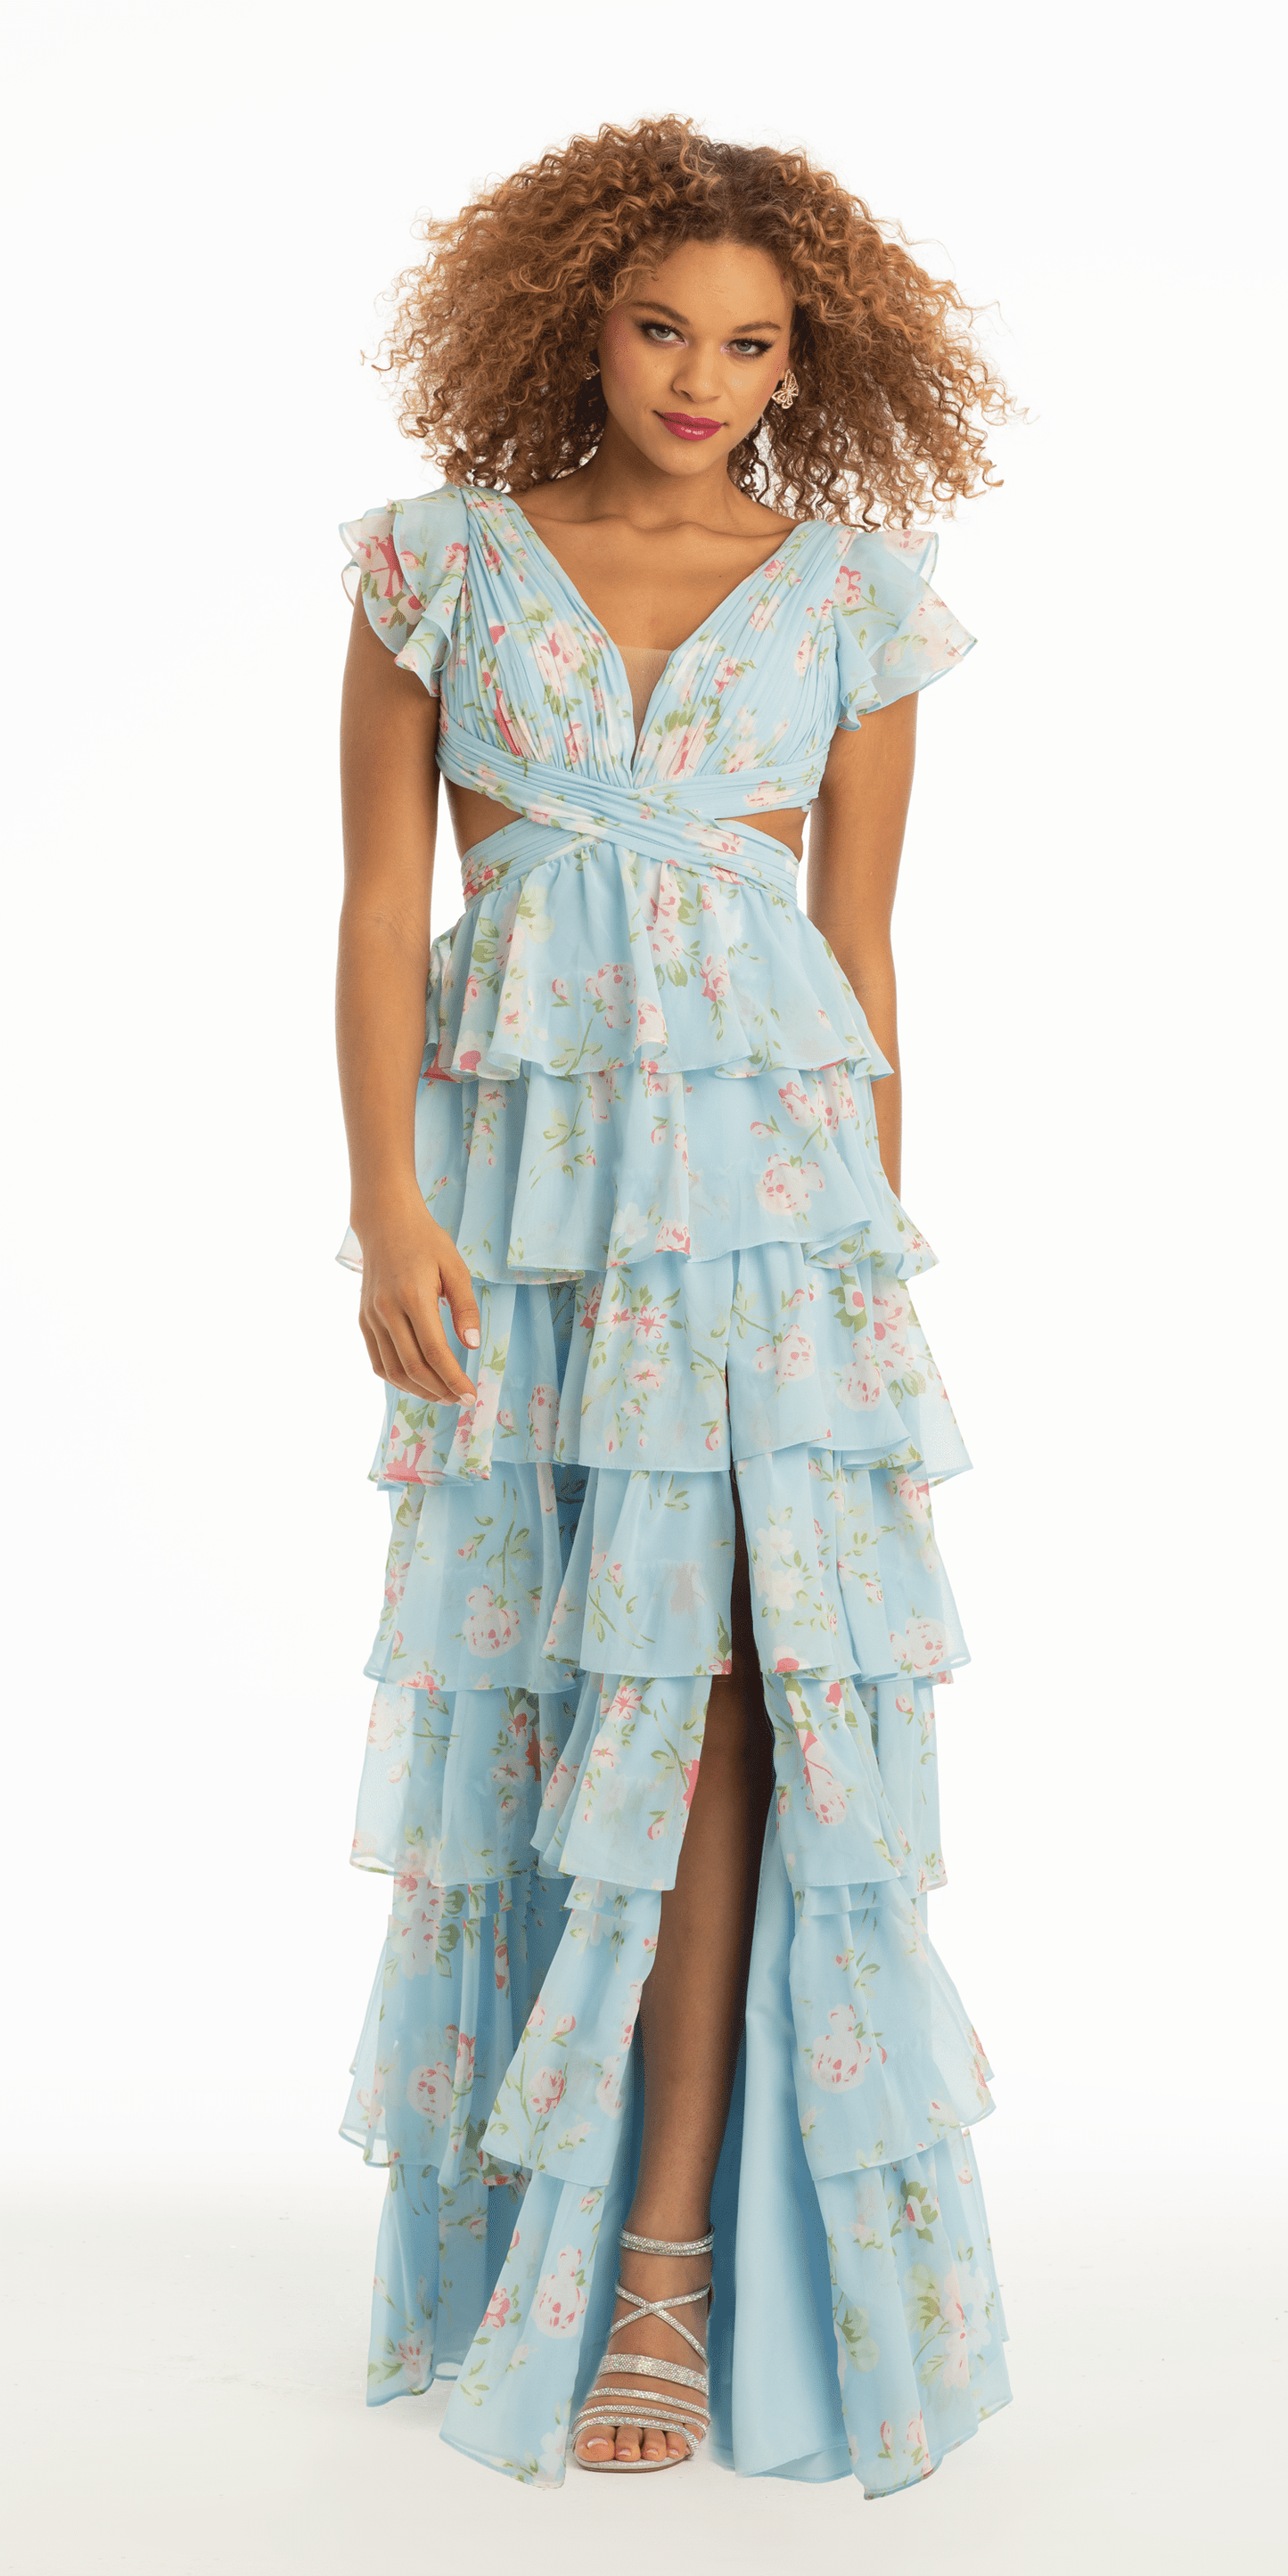 Camille La Vie Floral Print Chiffon Tiered Plunging Cap Sleeve Dress with Side Cut Outs missy / 0 / light-blue